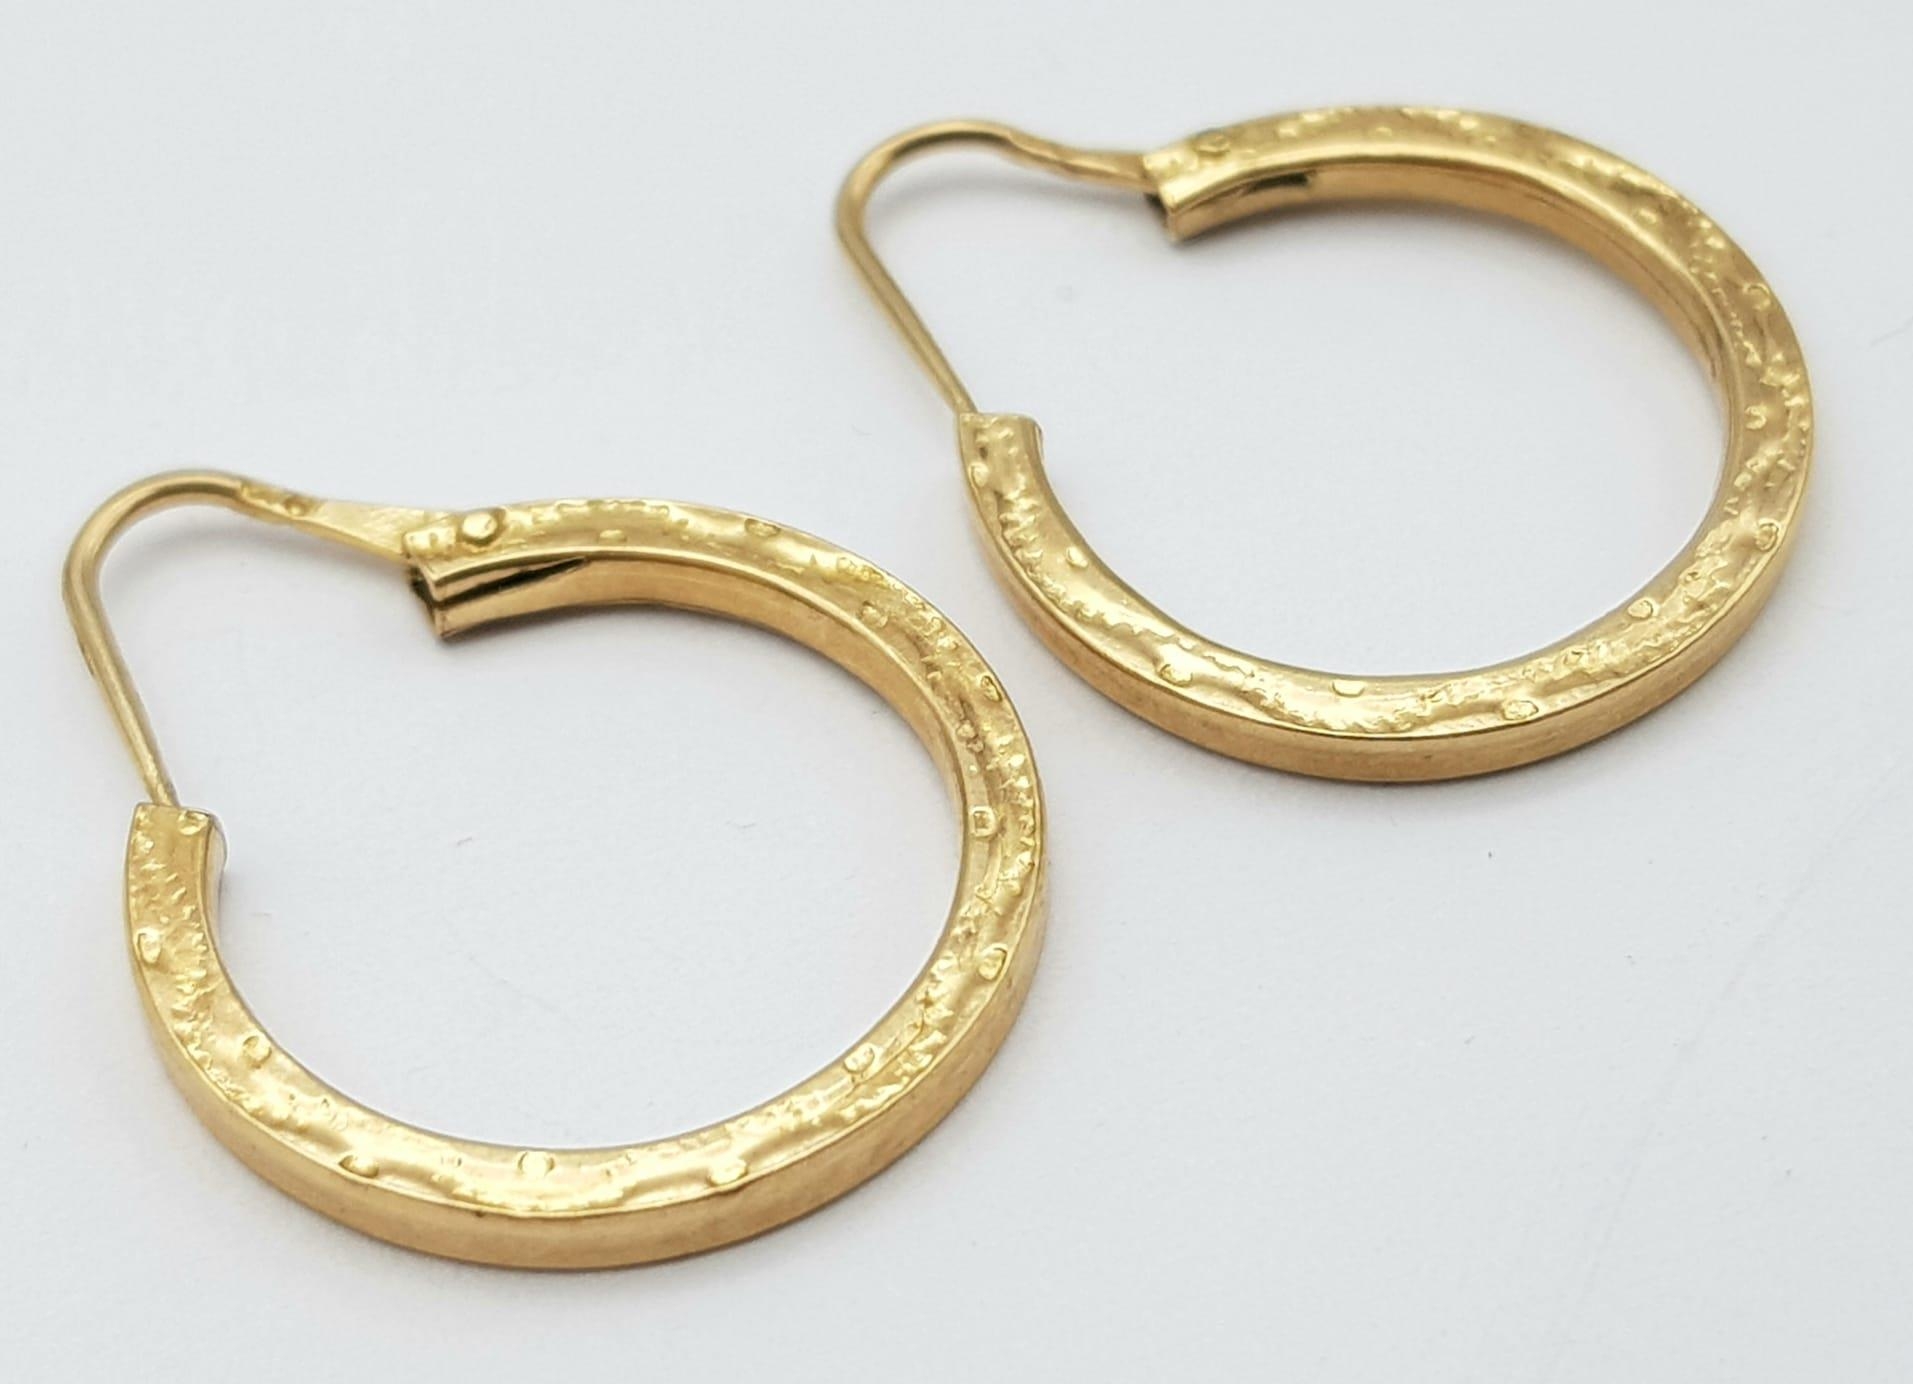 A Pair of 9K Yellow Gold Small Decorative Hoop Earrings. 1.92g weight.